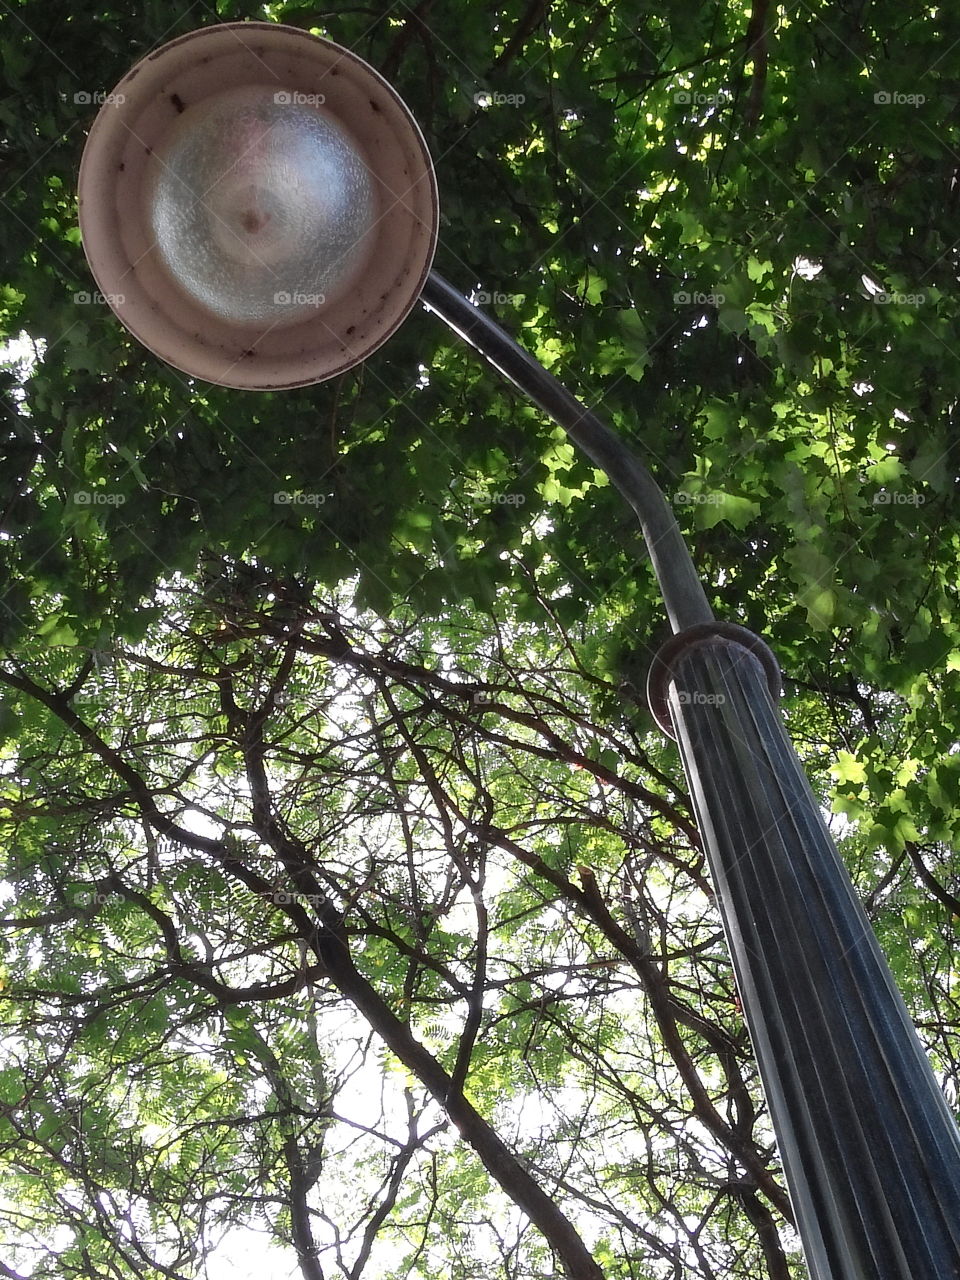 light in darkness. just a pretty lamp in a park